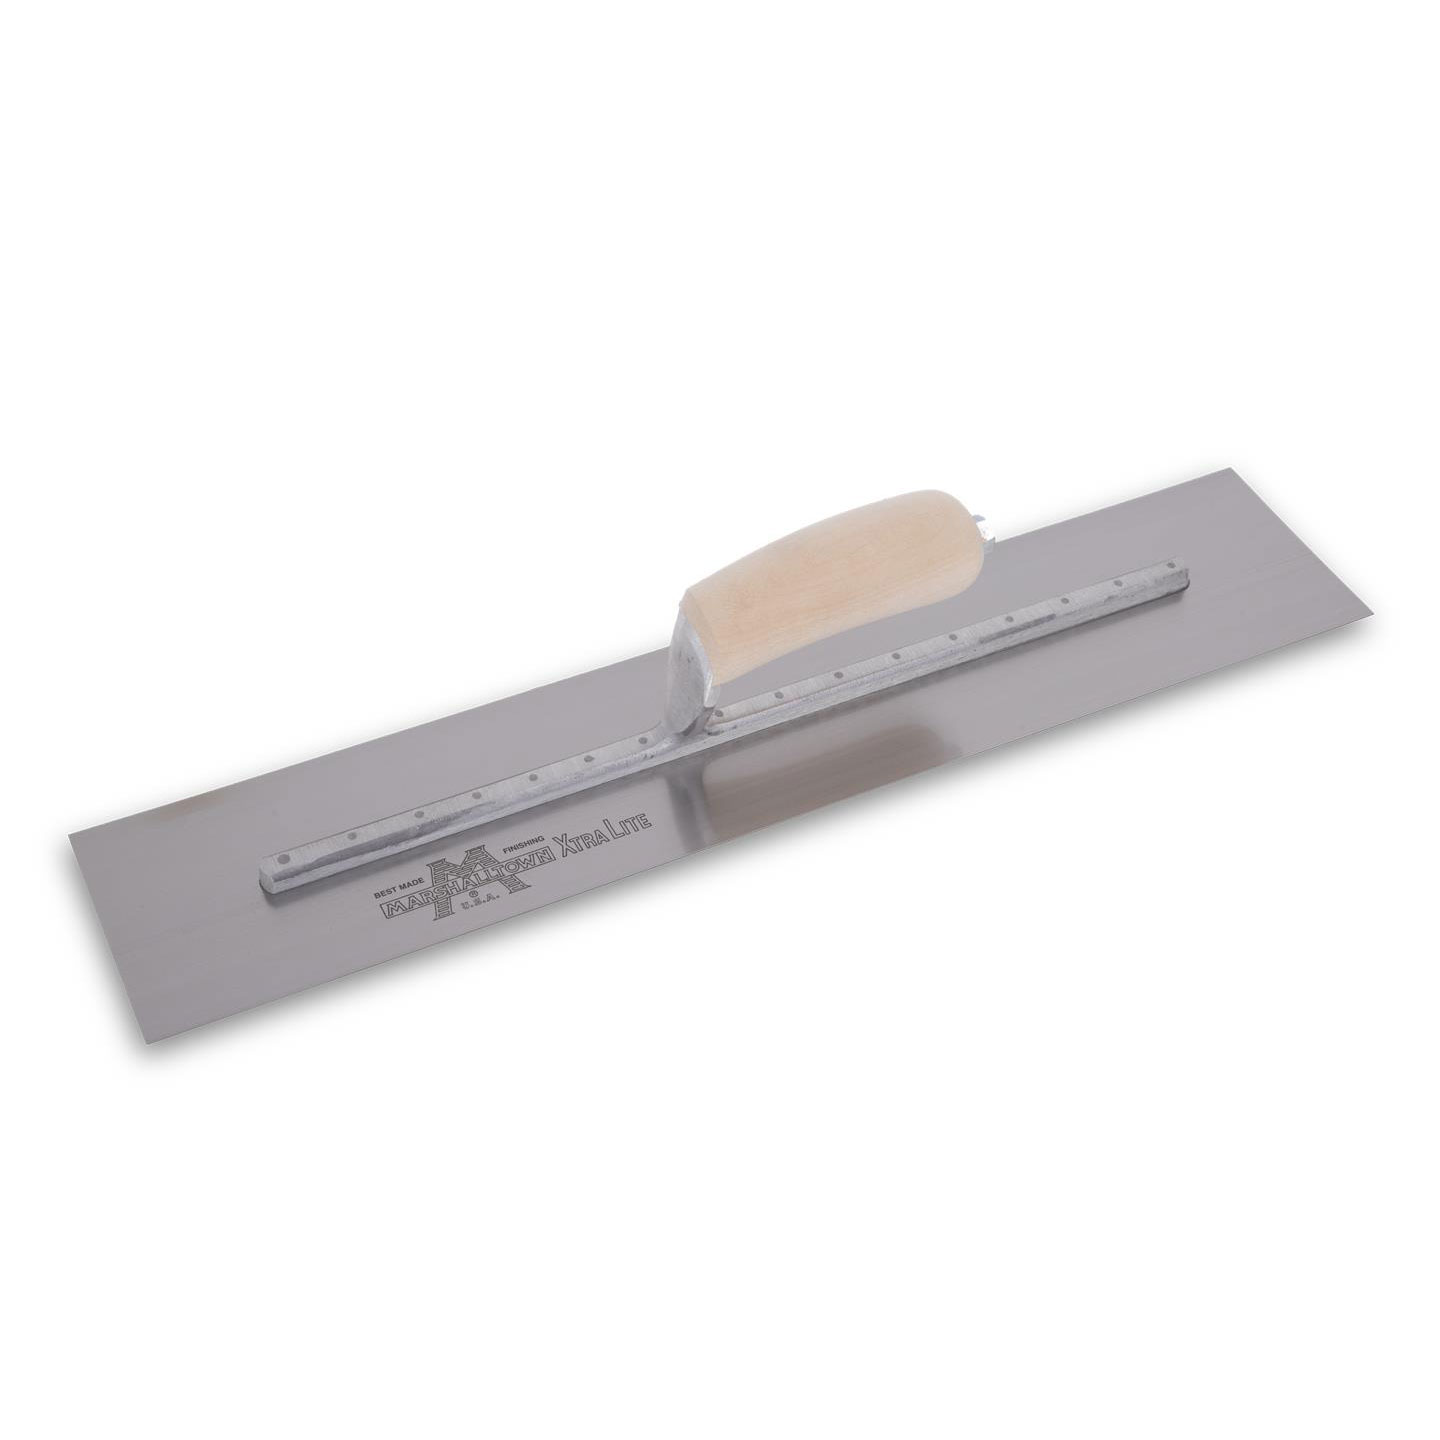 Marshalltown MXS205 20in X 5in Finishing Trowel with Curved Wood Handle MAT-MXS205